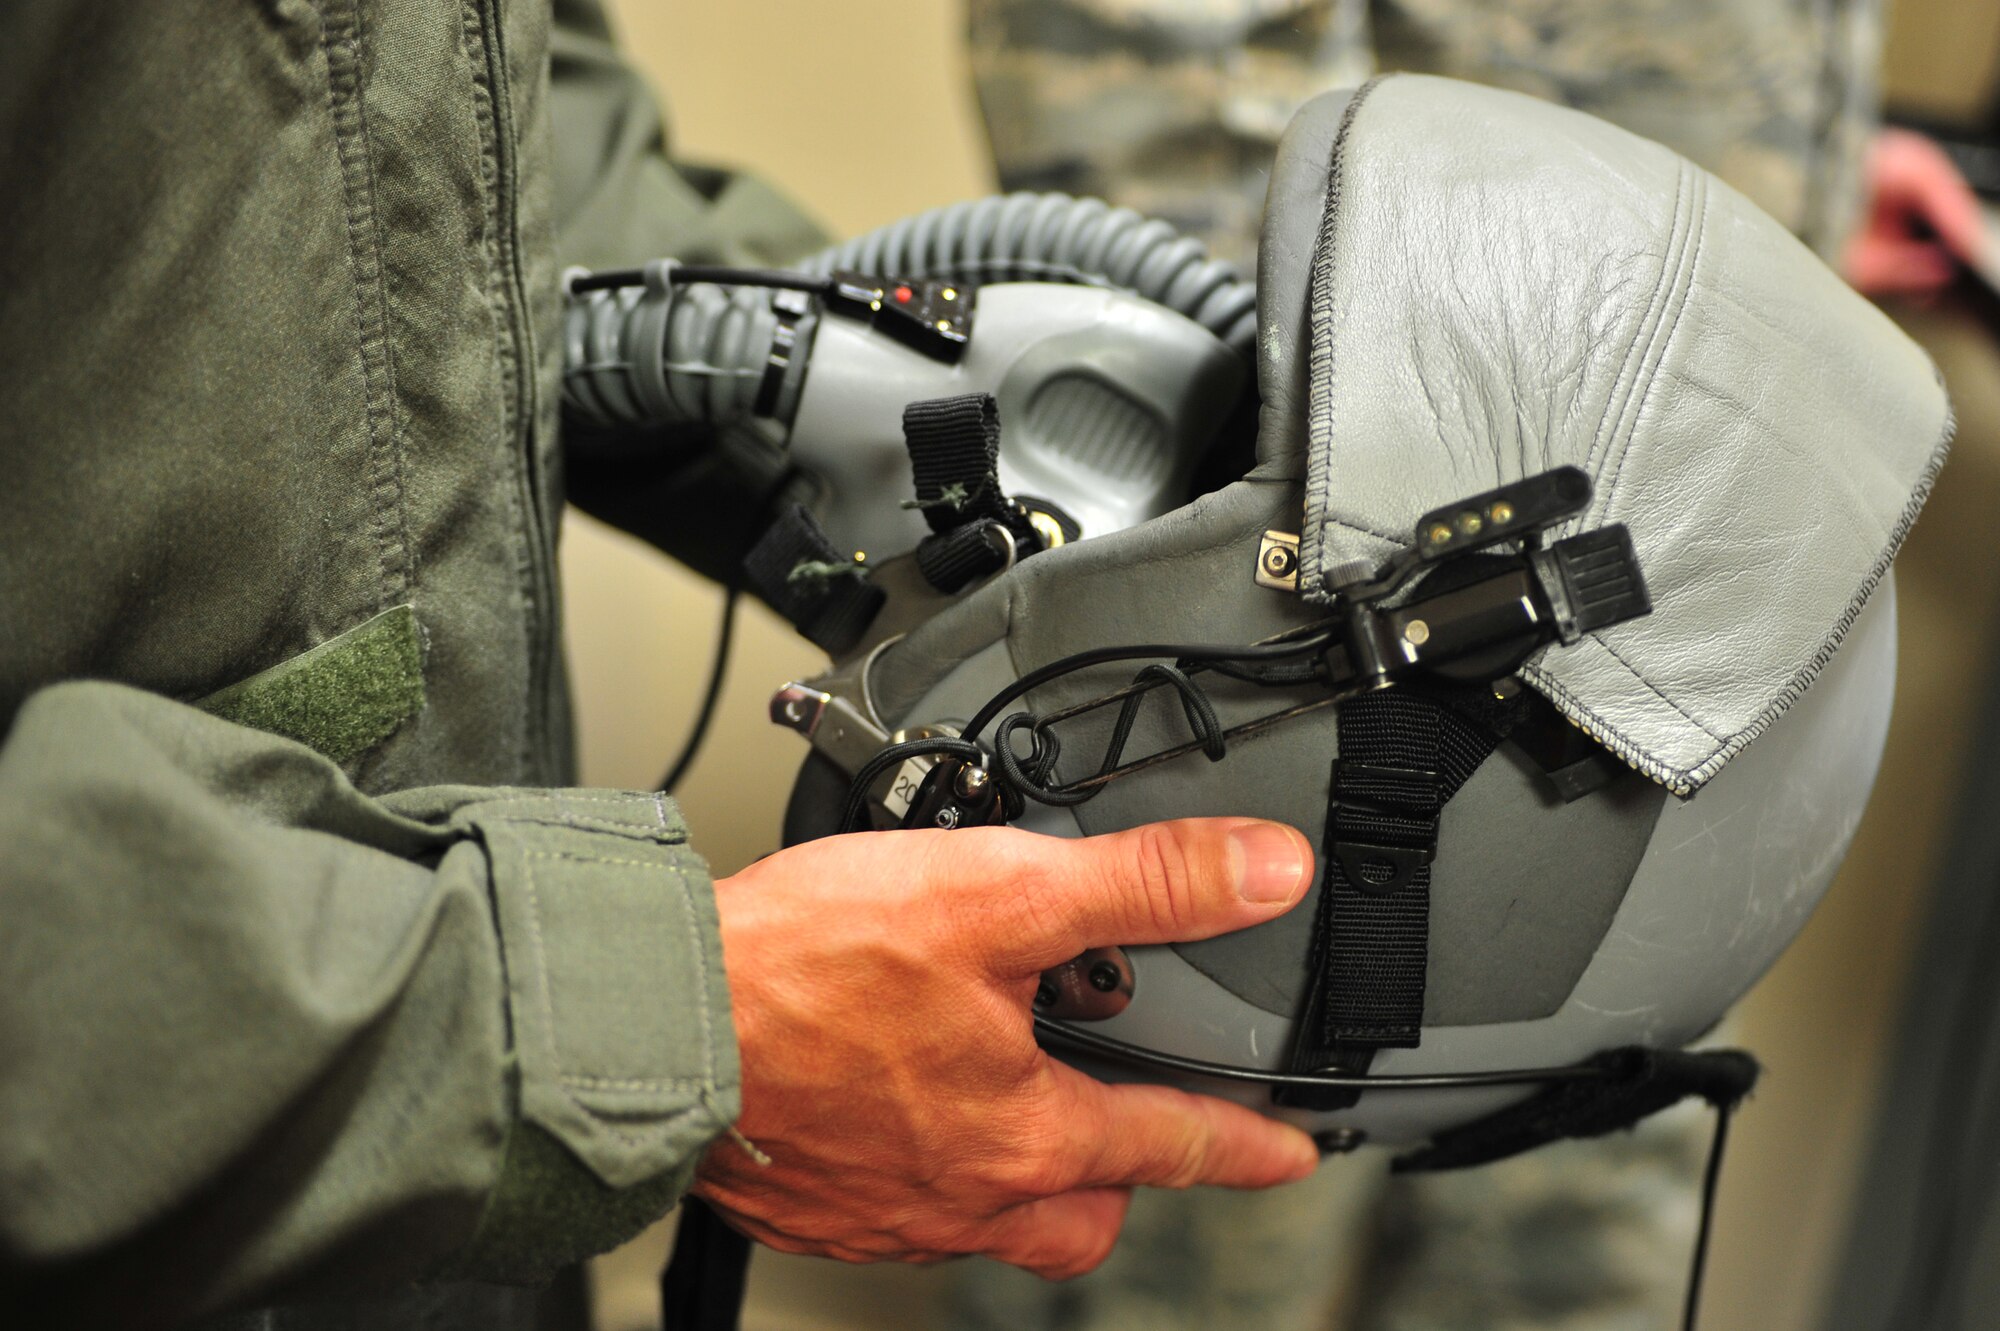 U.S. Air Force Capt. Jeremy Sparks, 16th Special Operations Squadron pilot, holds his helmet and oxygen mask after it was checked for leaks at Cannon Air Force Base, N.M., July 3, 2012. Aircrew flight equipment specialists inspect, maintain and adjust life support and survival gear for flight crew members assigned to Cannon. (U.S. Air Force photo by Airman 1st Class Eboni Reece)